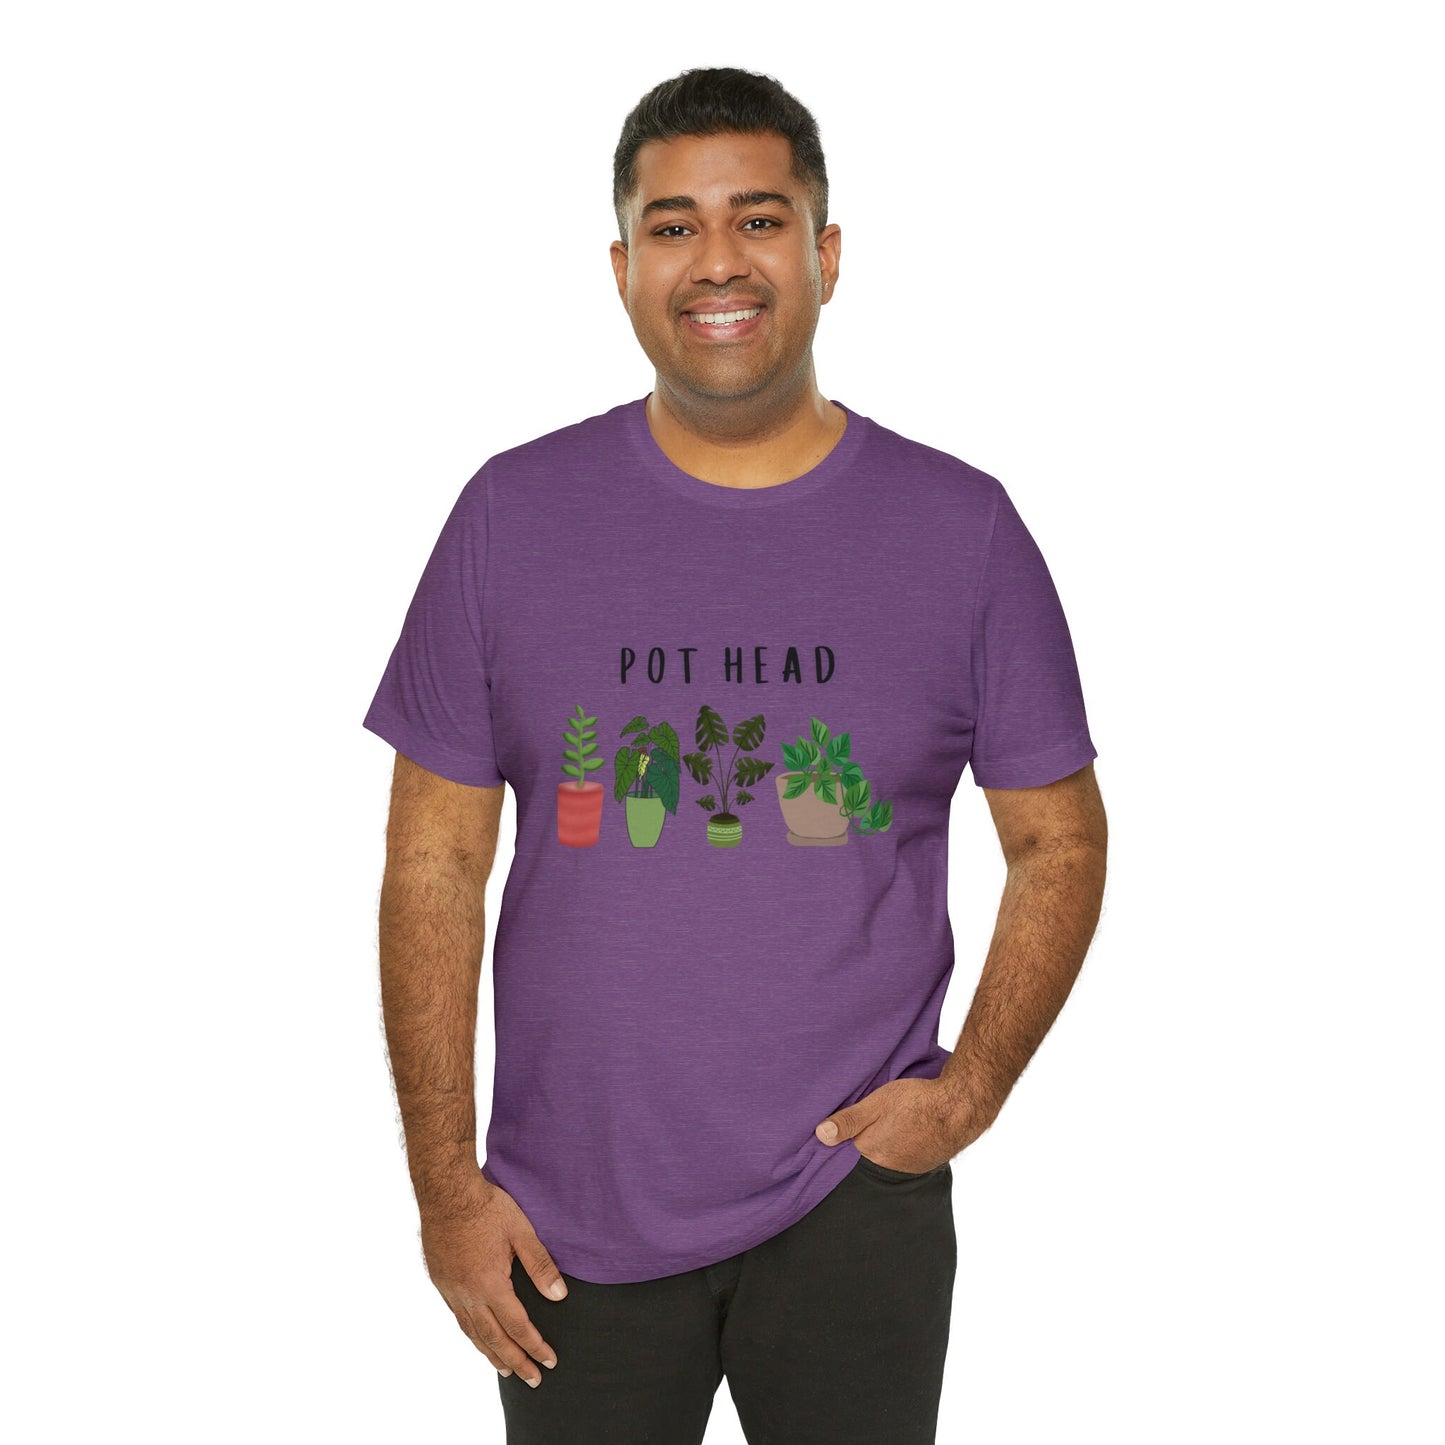 Pot Head T-Shirt - Shirt with plants - Gift for plant lover - Green Thumb Shirt